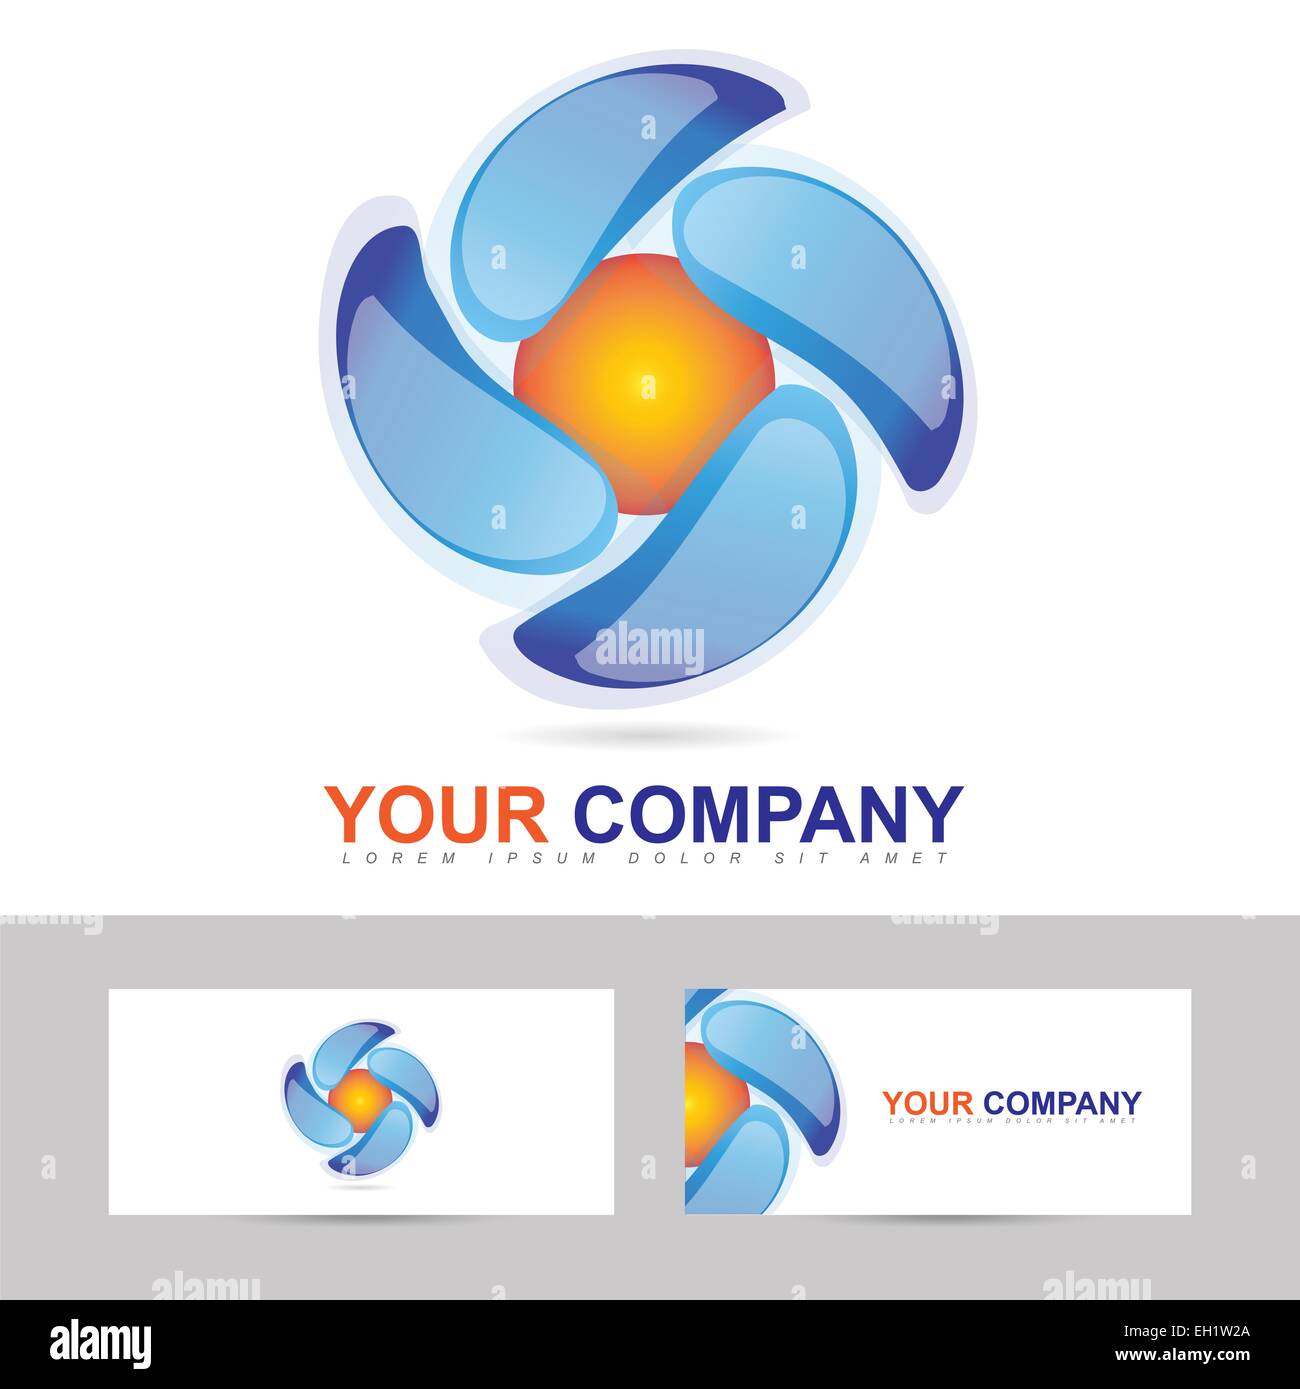 Creative design for a business logo vector with business card template Stock Photo